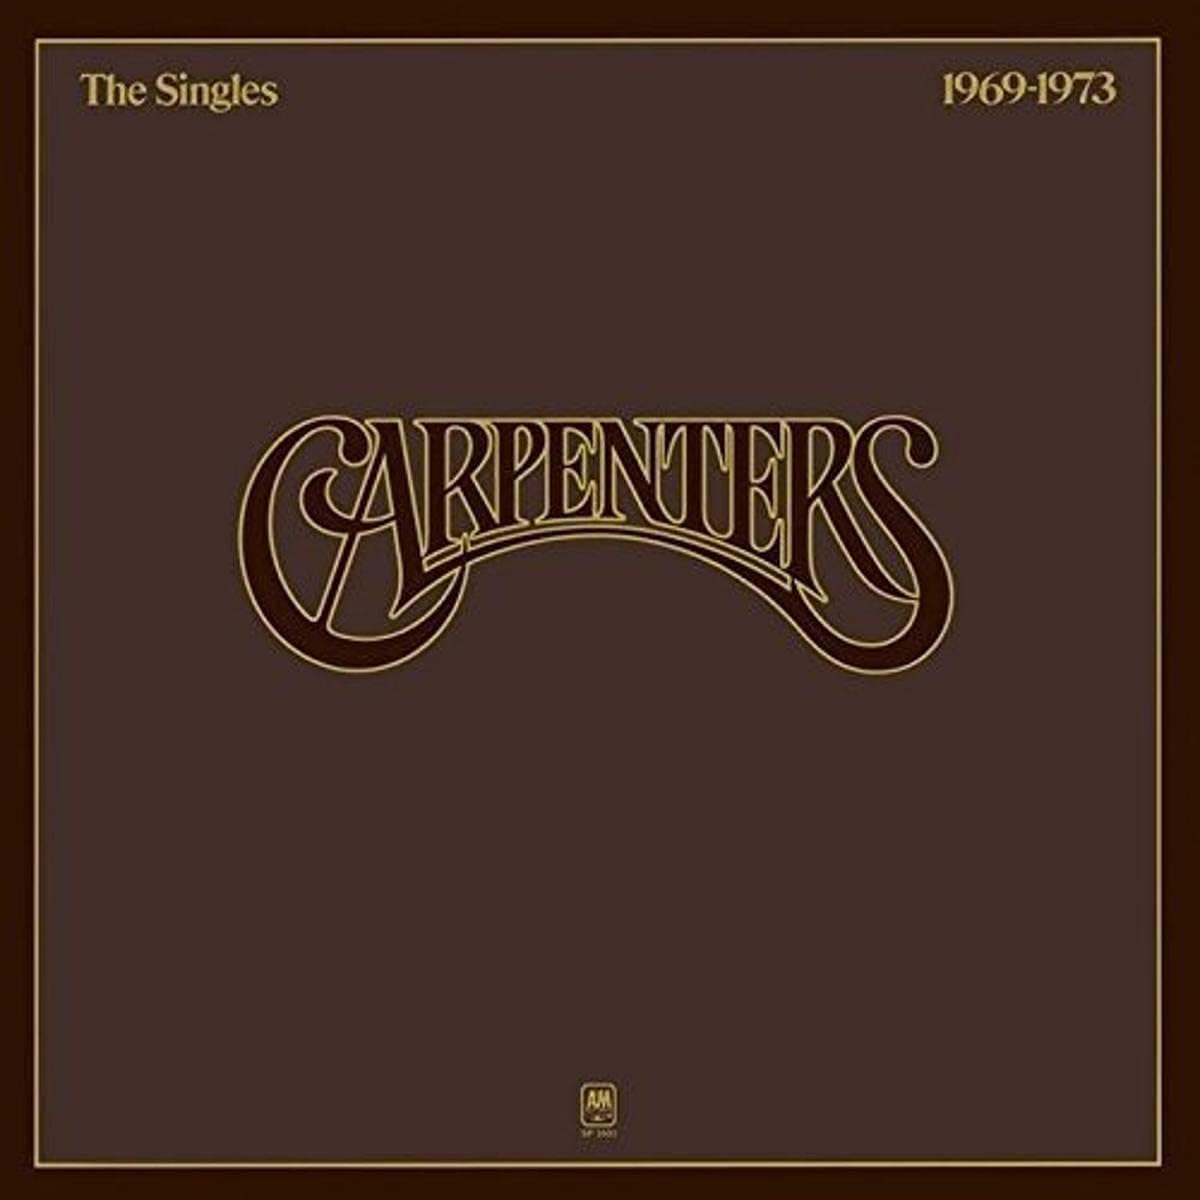 Carpenters_the_singles_1969-1973 front cover